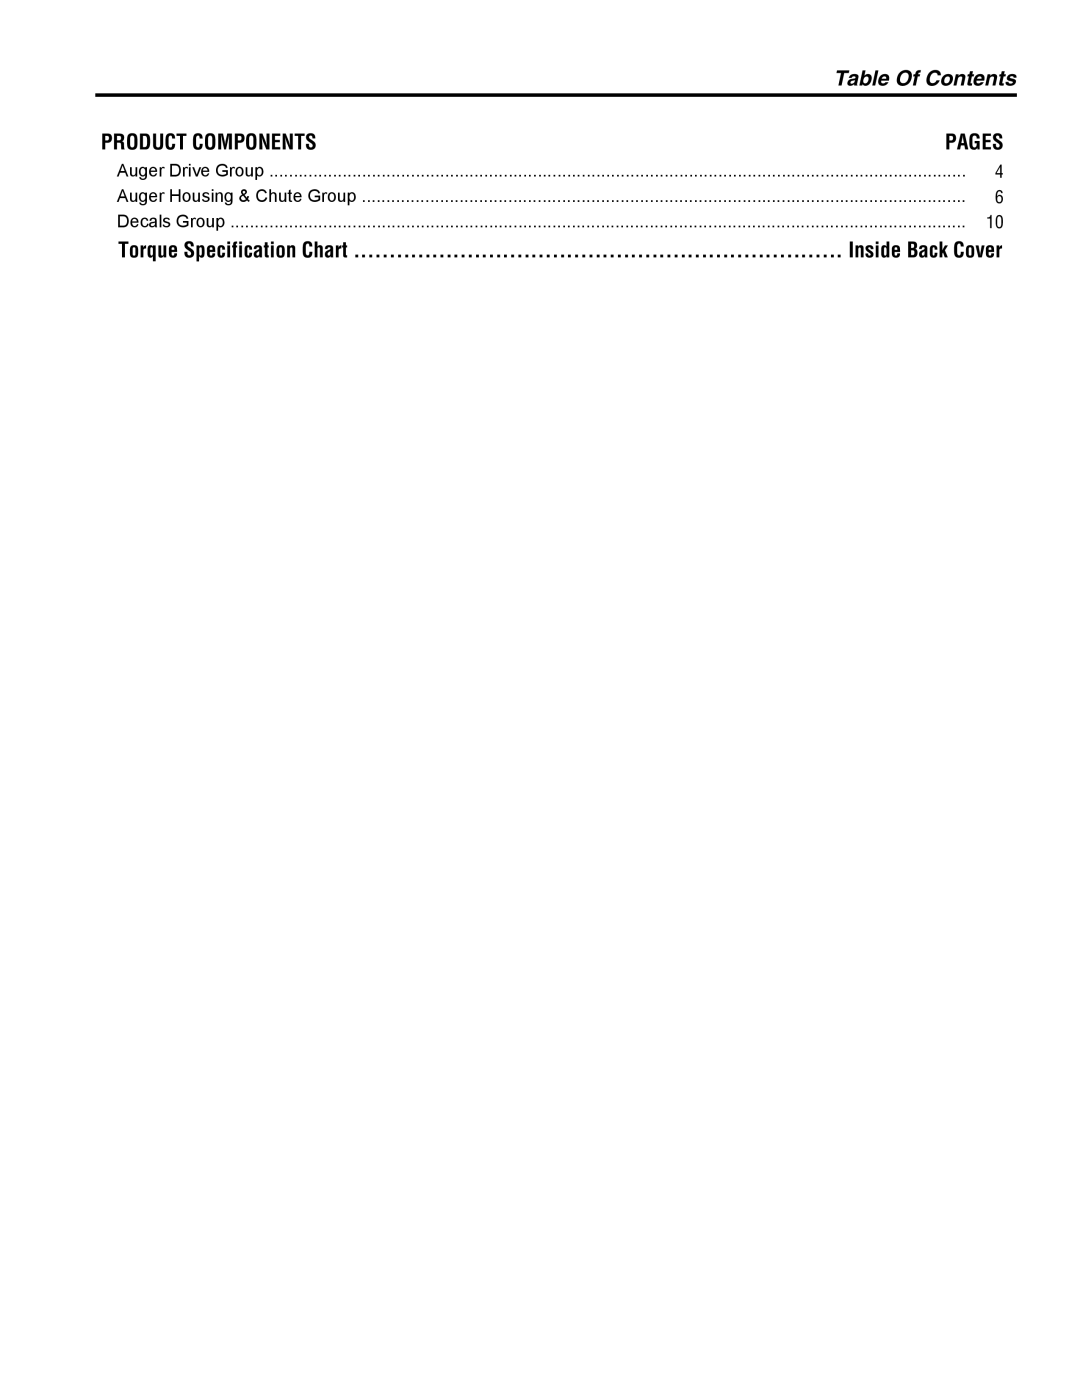 Simplicity 1694874 manual Table Of Contents, Product Components, Pages, Torque Specification Chart, Inside Back Cover 